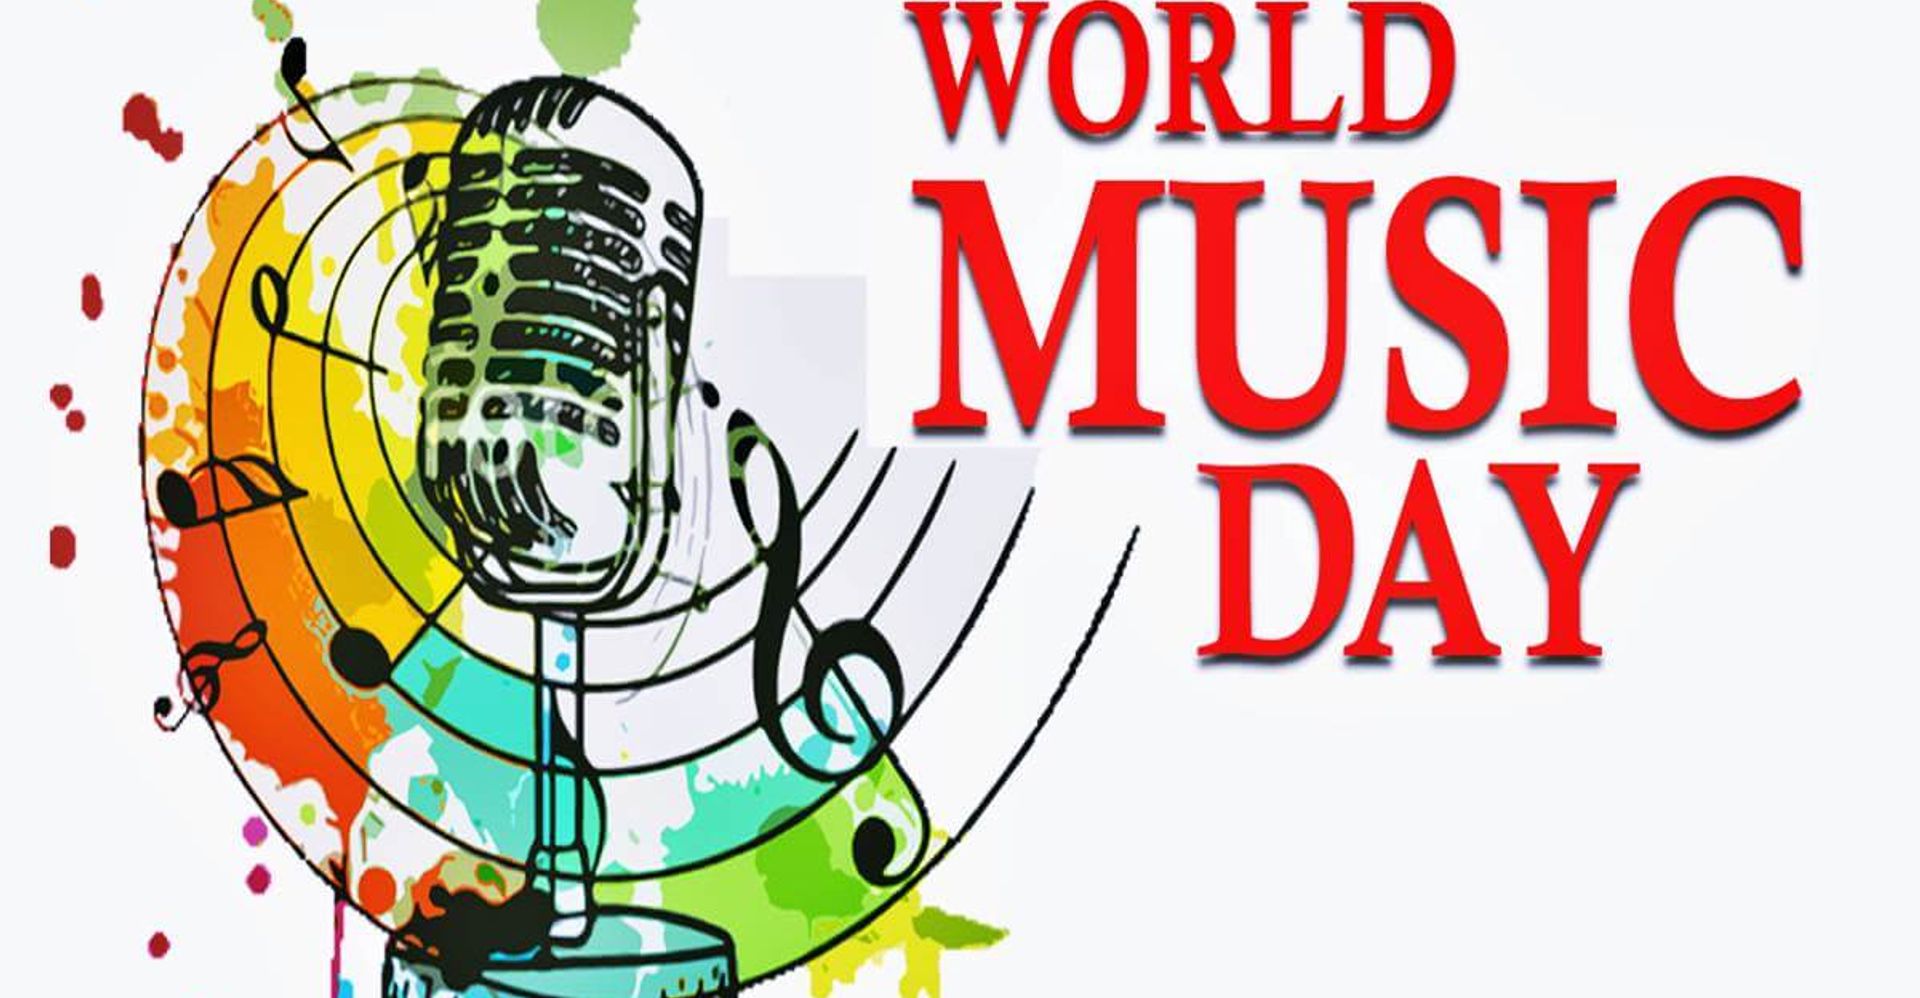 It is World Music Day on 21st June 2021. At Next Phase our musical tastes cover the whole range from House to Punk, Classical to Ska, and Pop to Death Metal, 